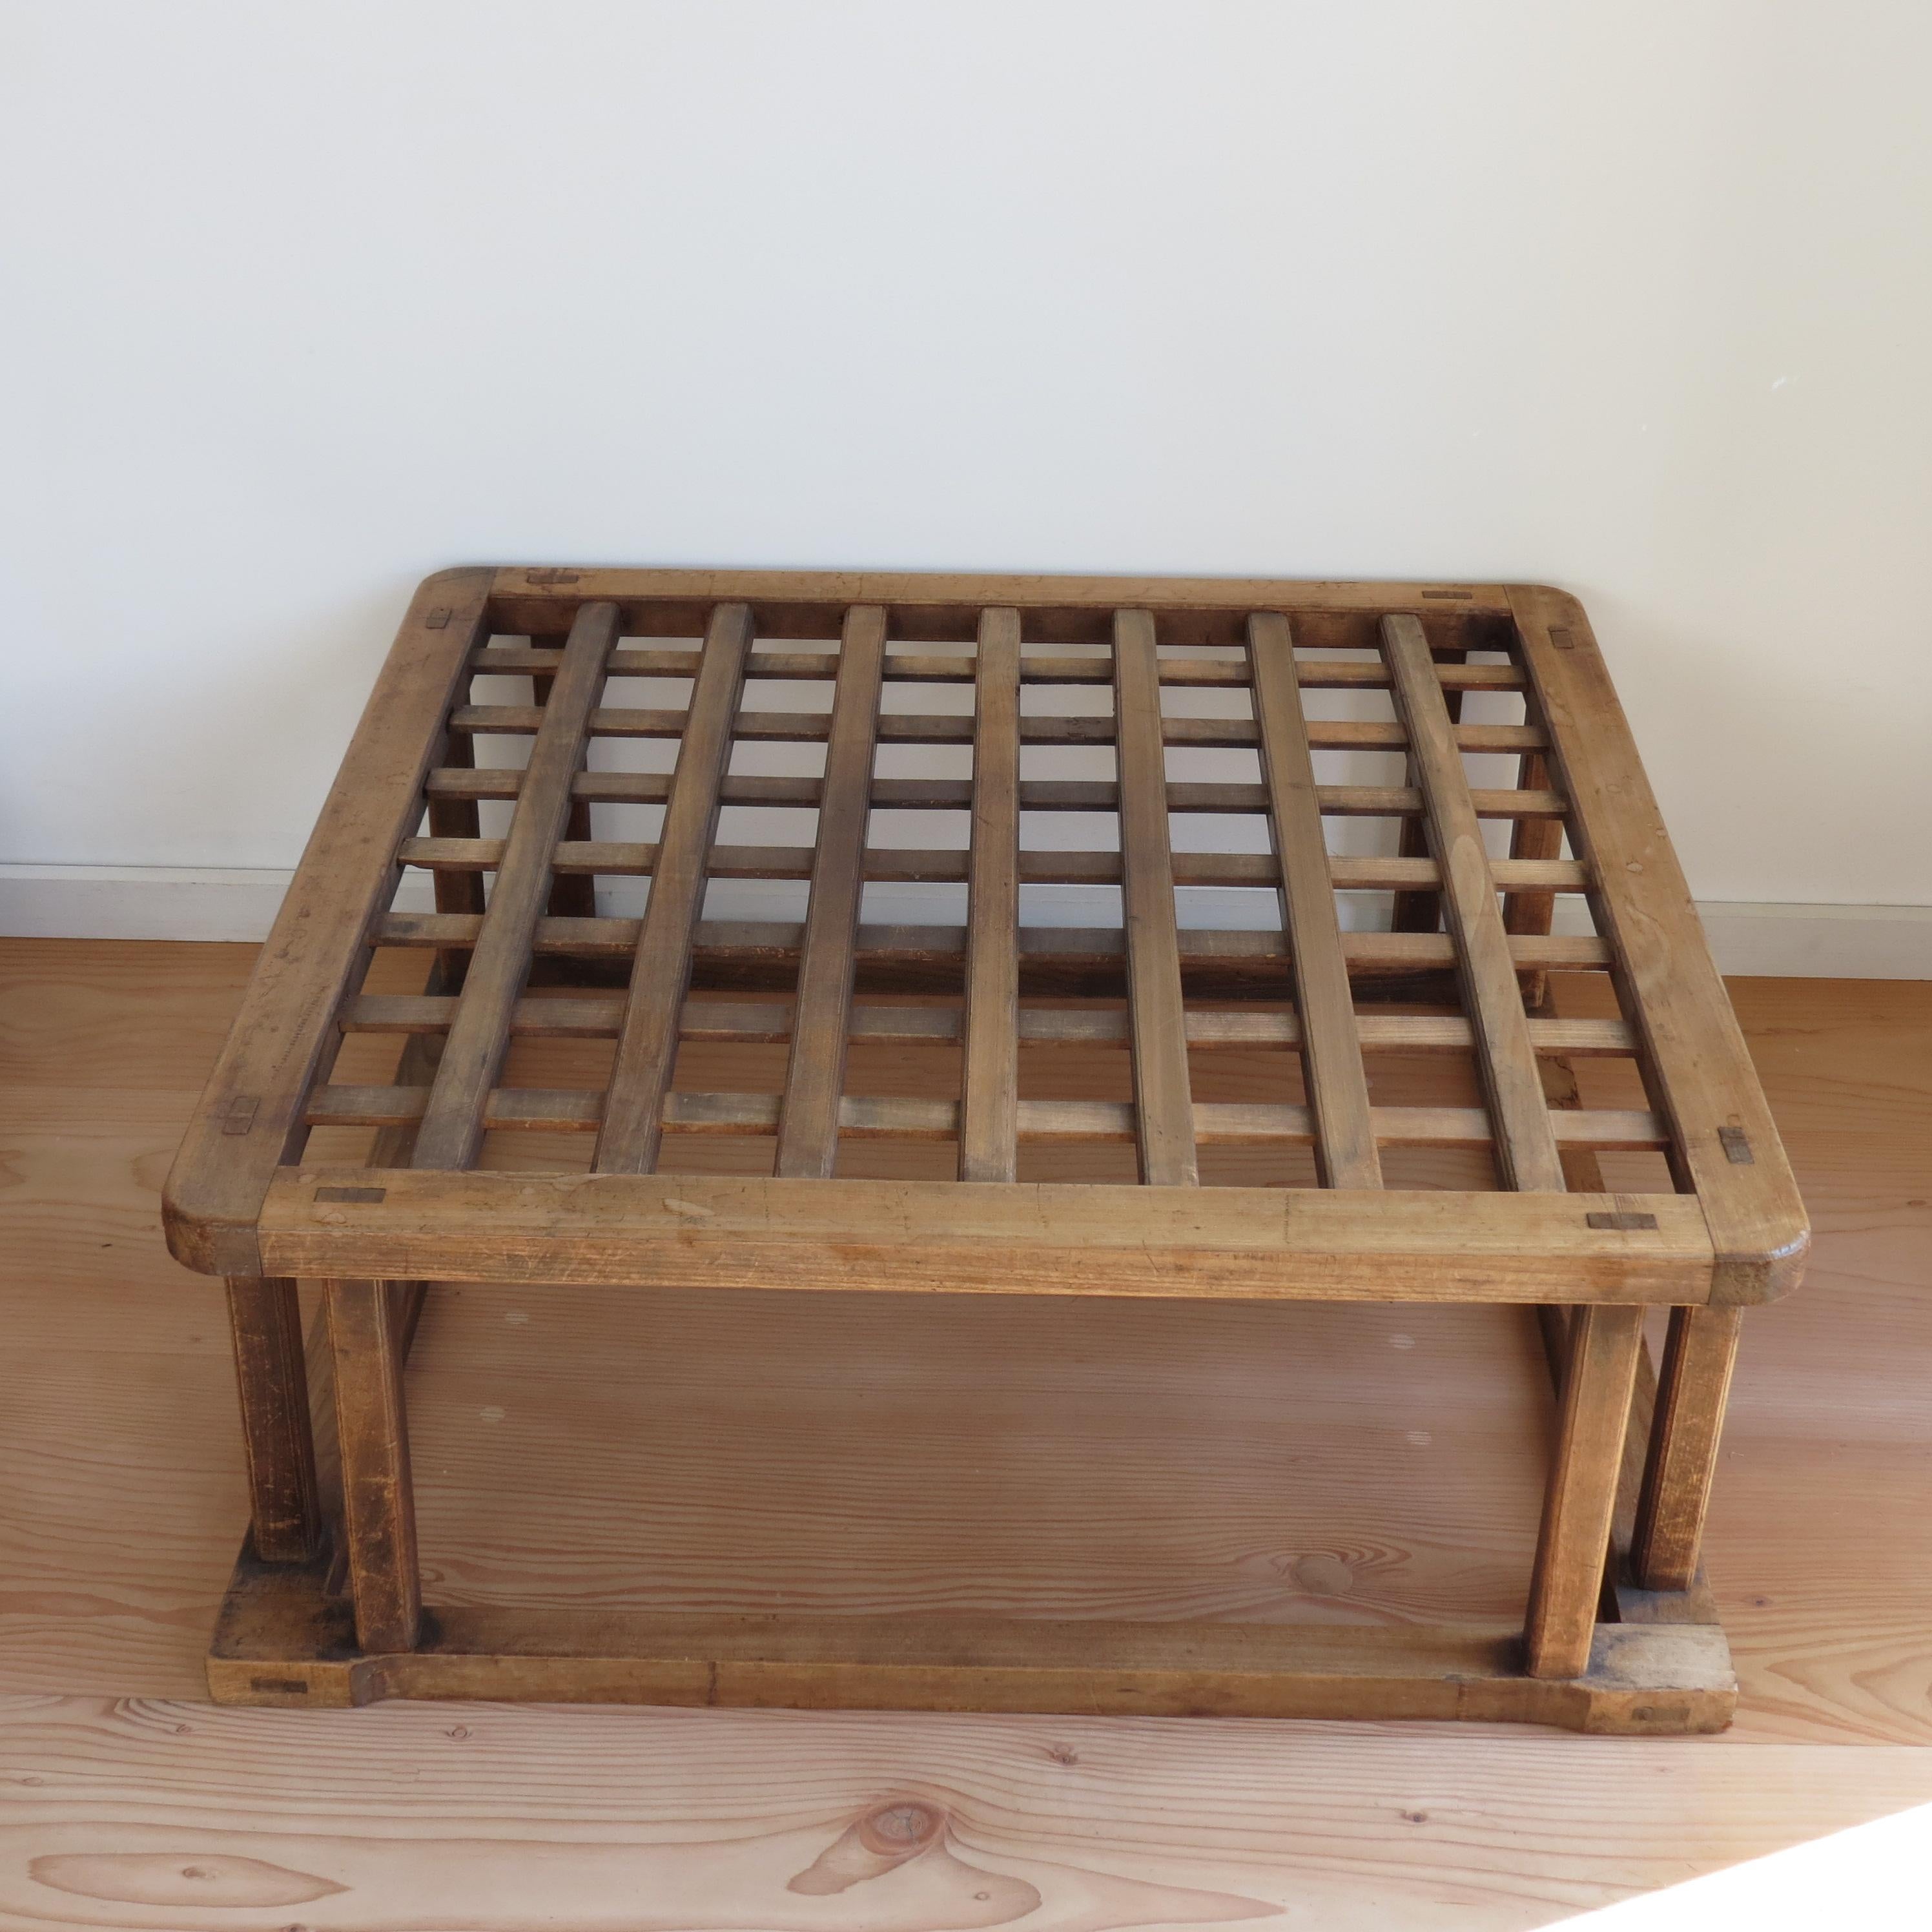 Wonderful vintage Japanese Kotatsu table, hand produced and dates between 1930-1950. Wonderful colour and patination through use over time.
Very nicely hand made from Honoki Wood. 

A glass top sits to the inside of the frame.

 